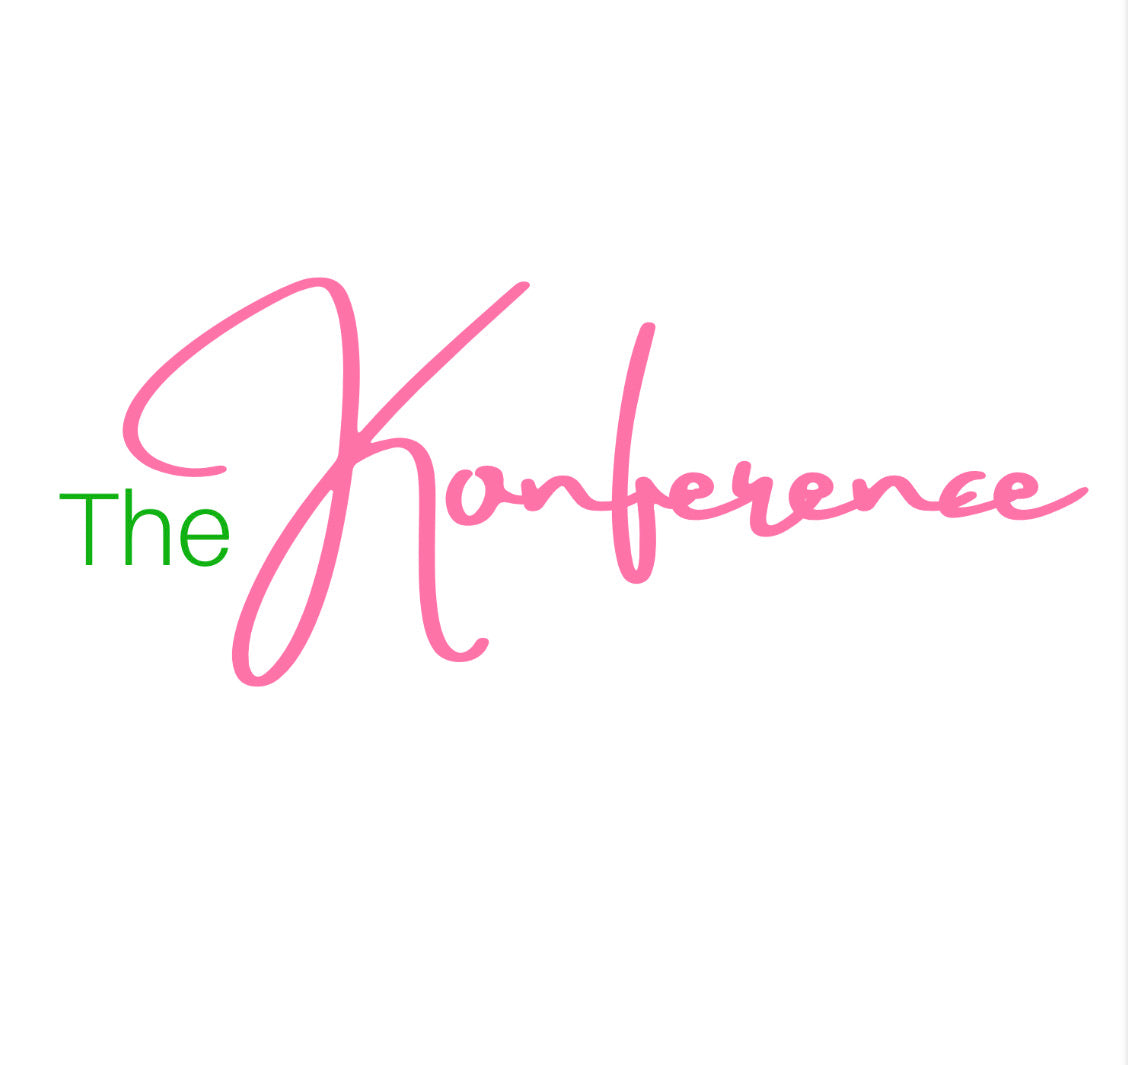 The Konference